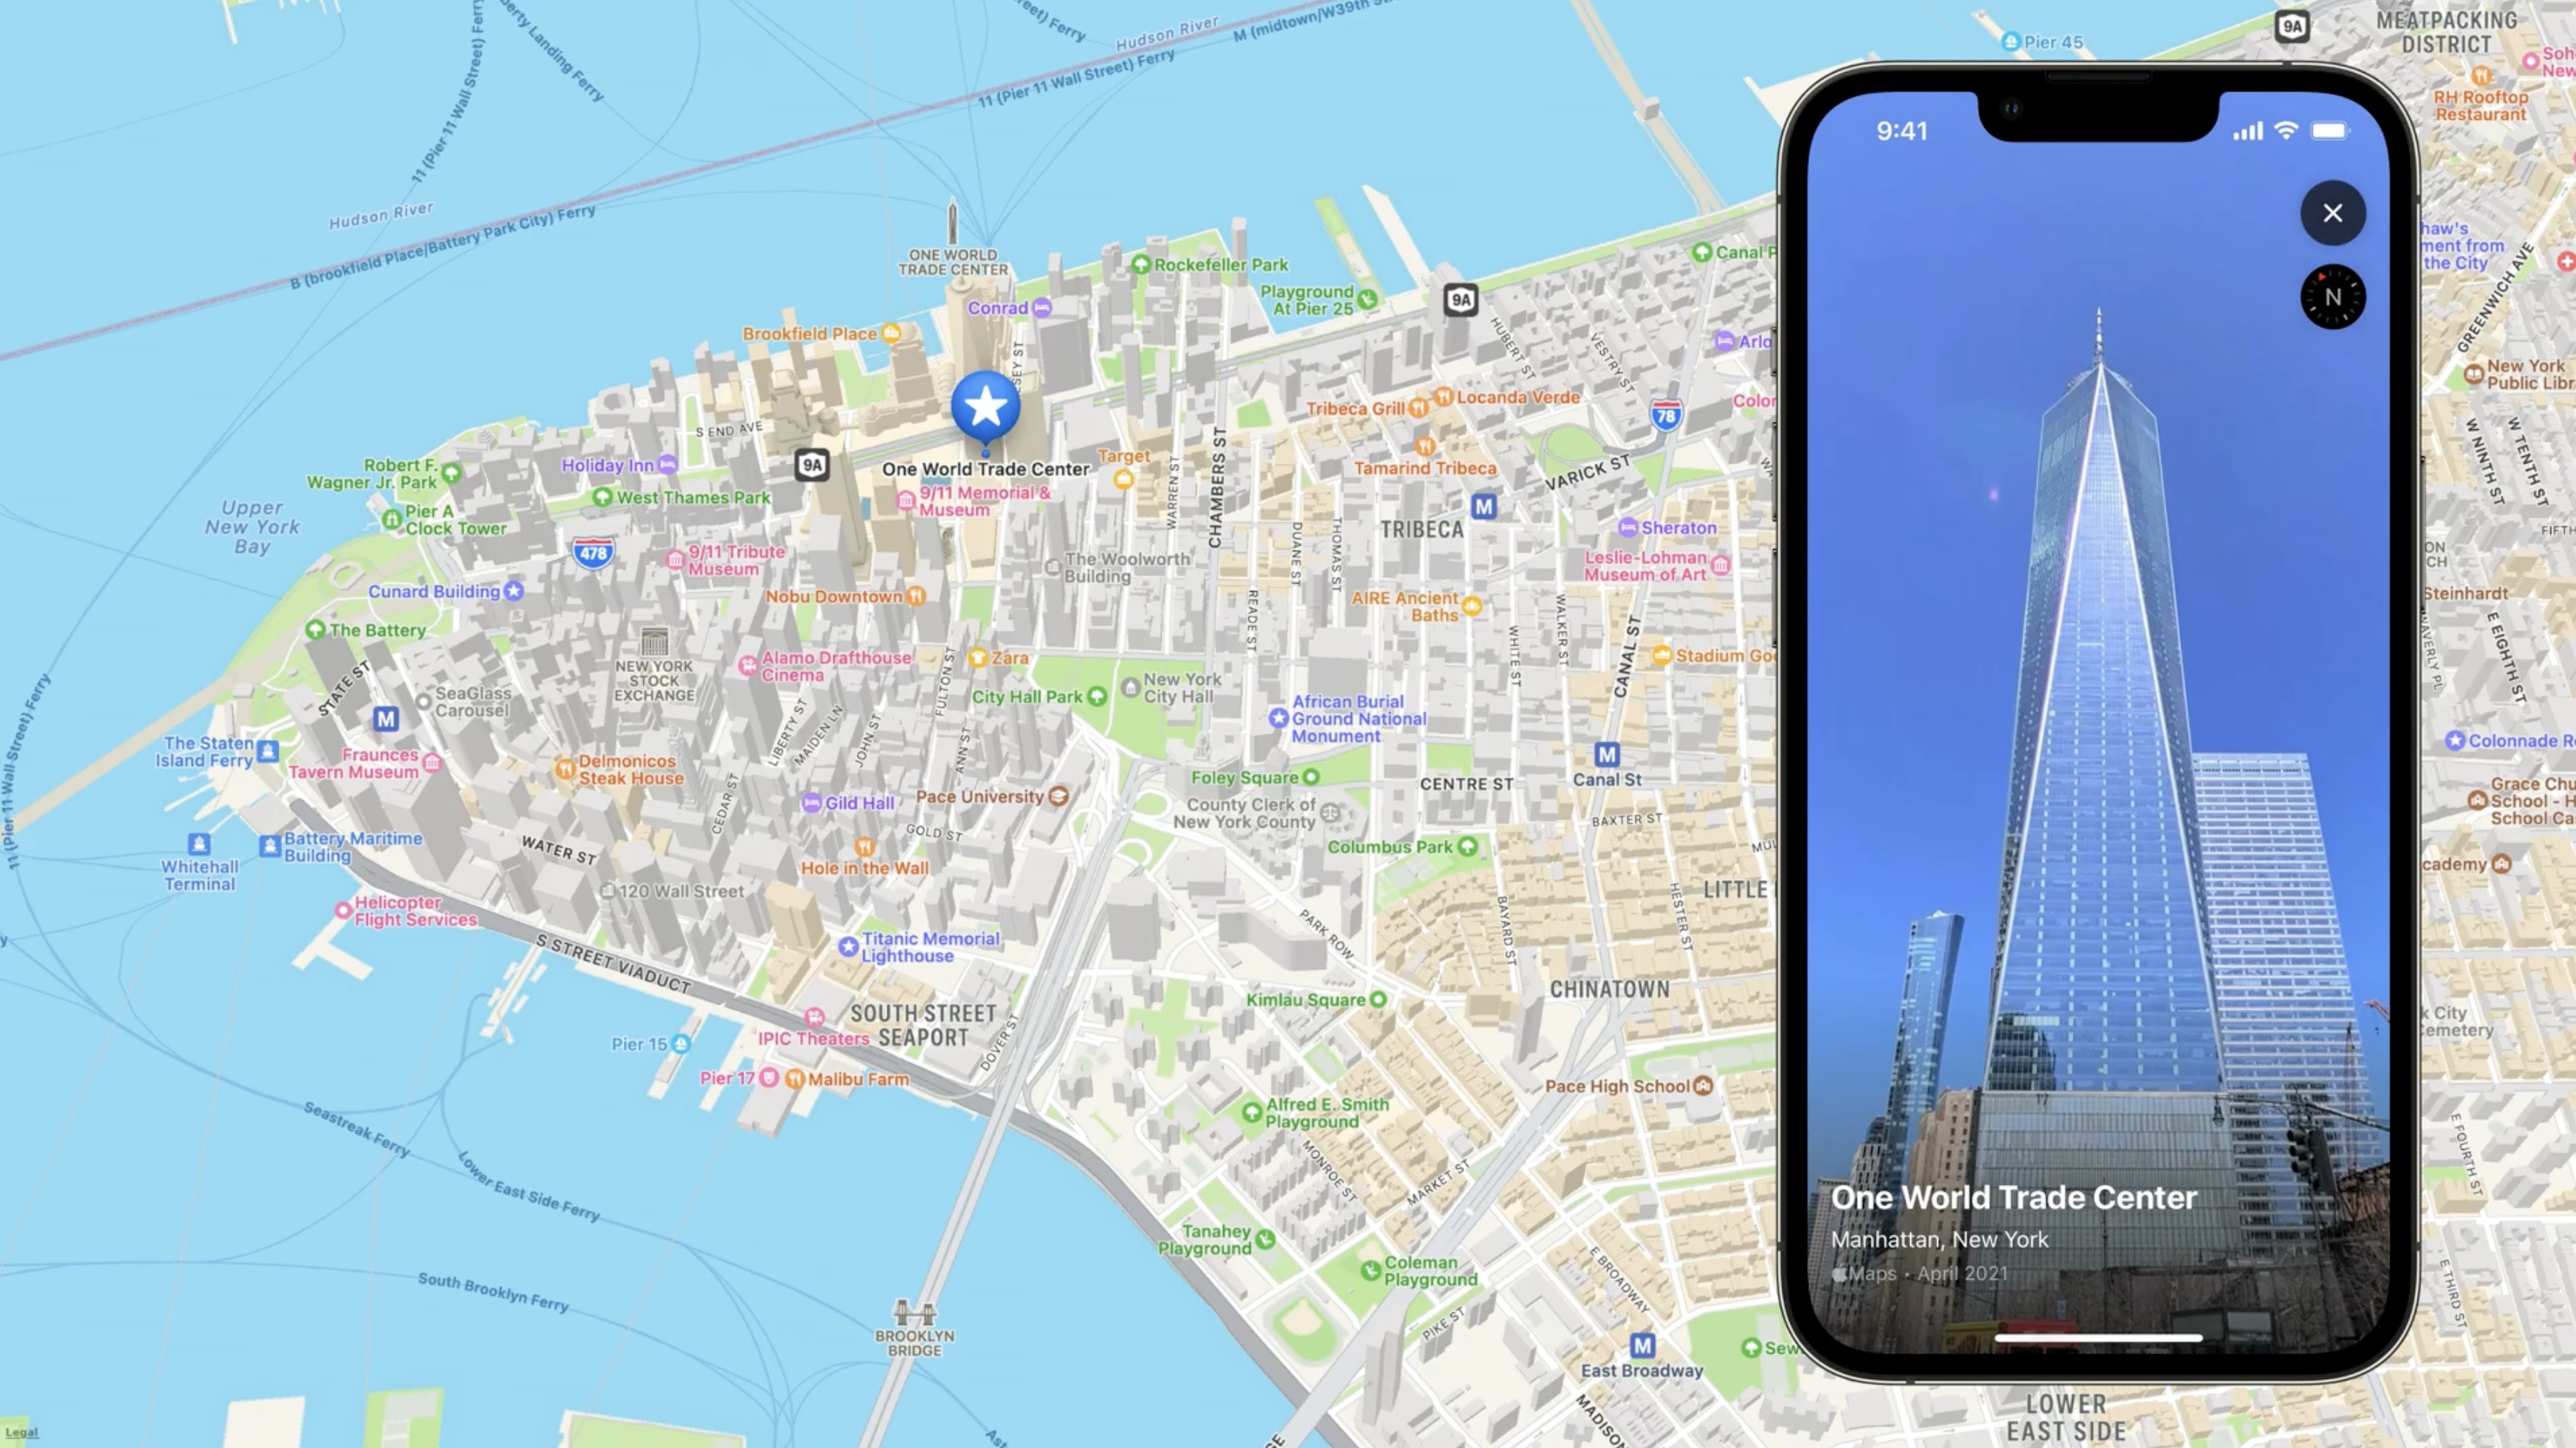 New Apple Maps screenshot with One World Trade Center